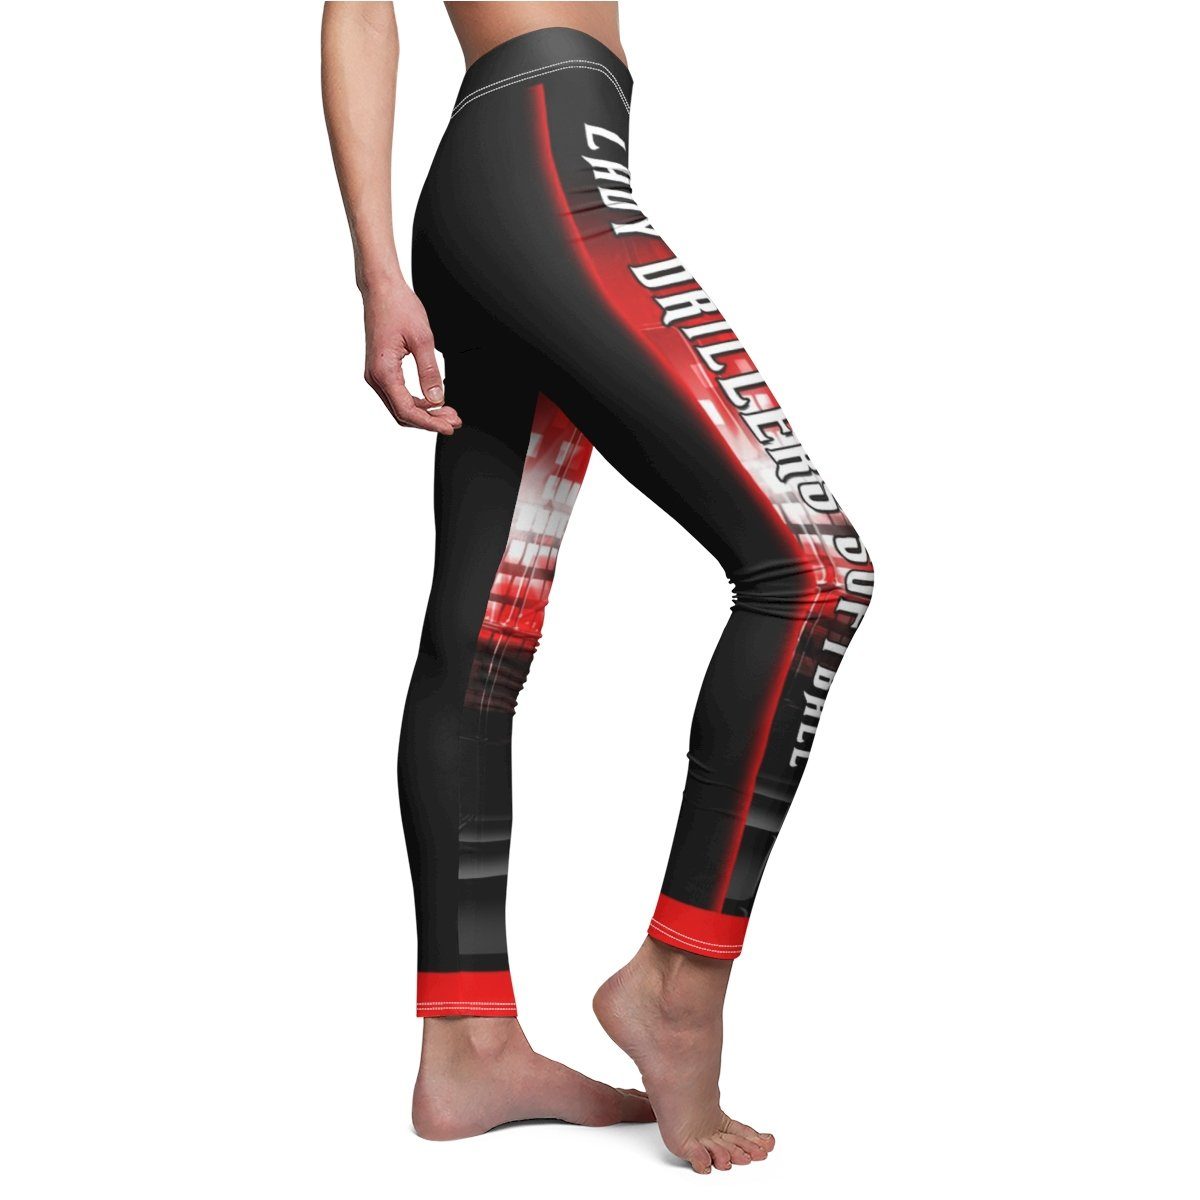 Equalizer - V.2 - Extreme Sportswear Cut & Sew Leggings Template-Photoshop Template - Photo Solutions